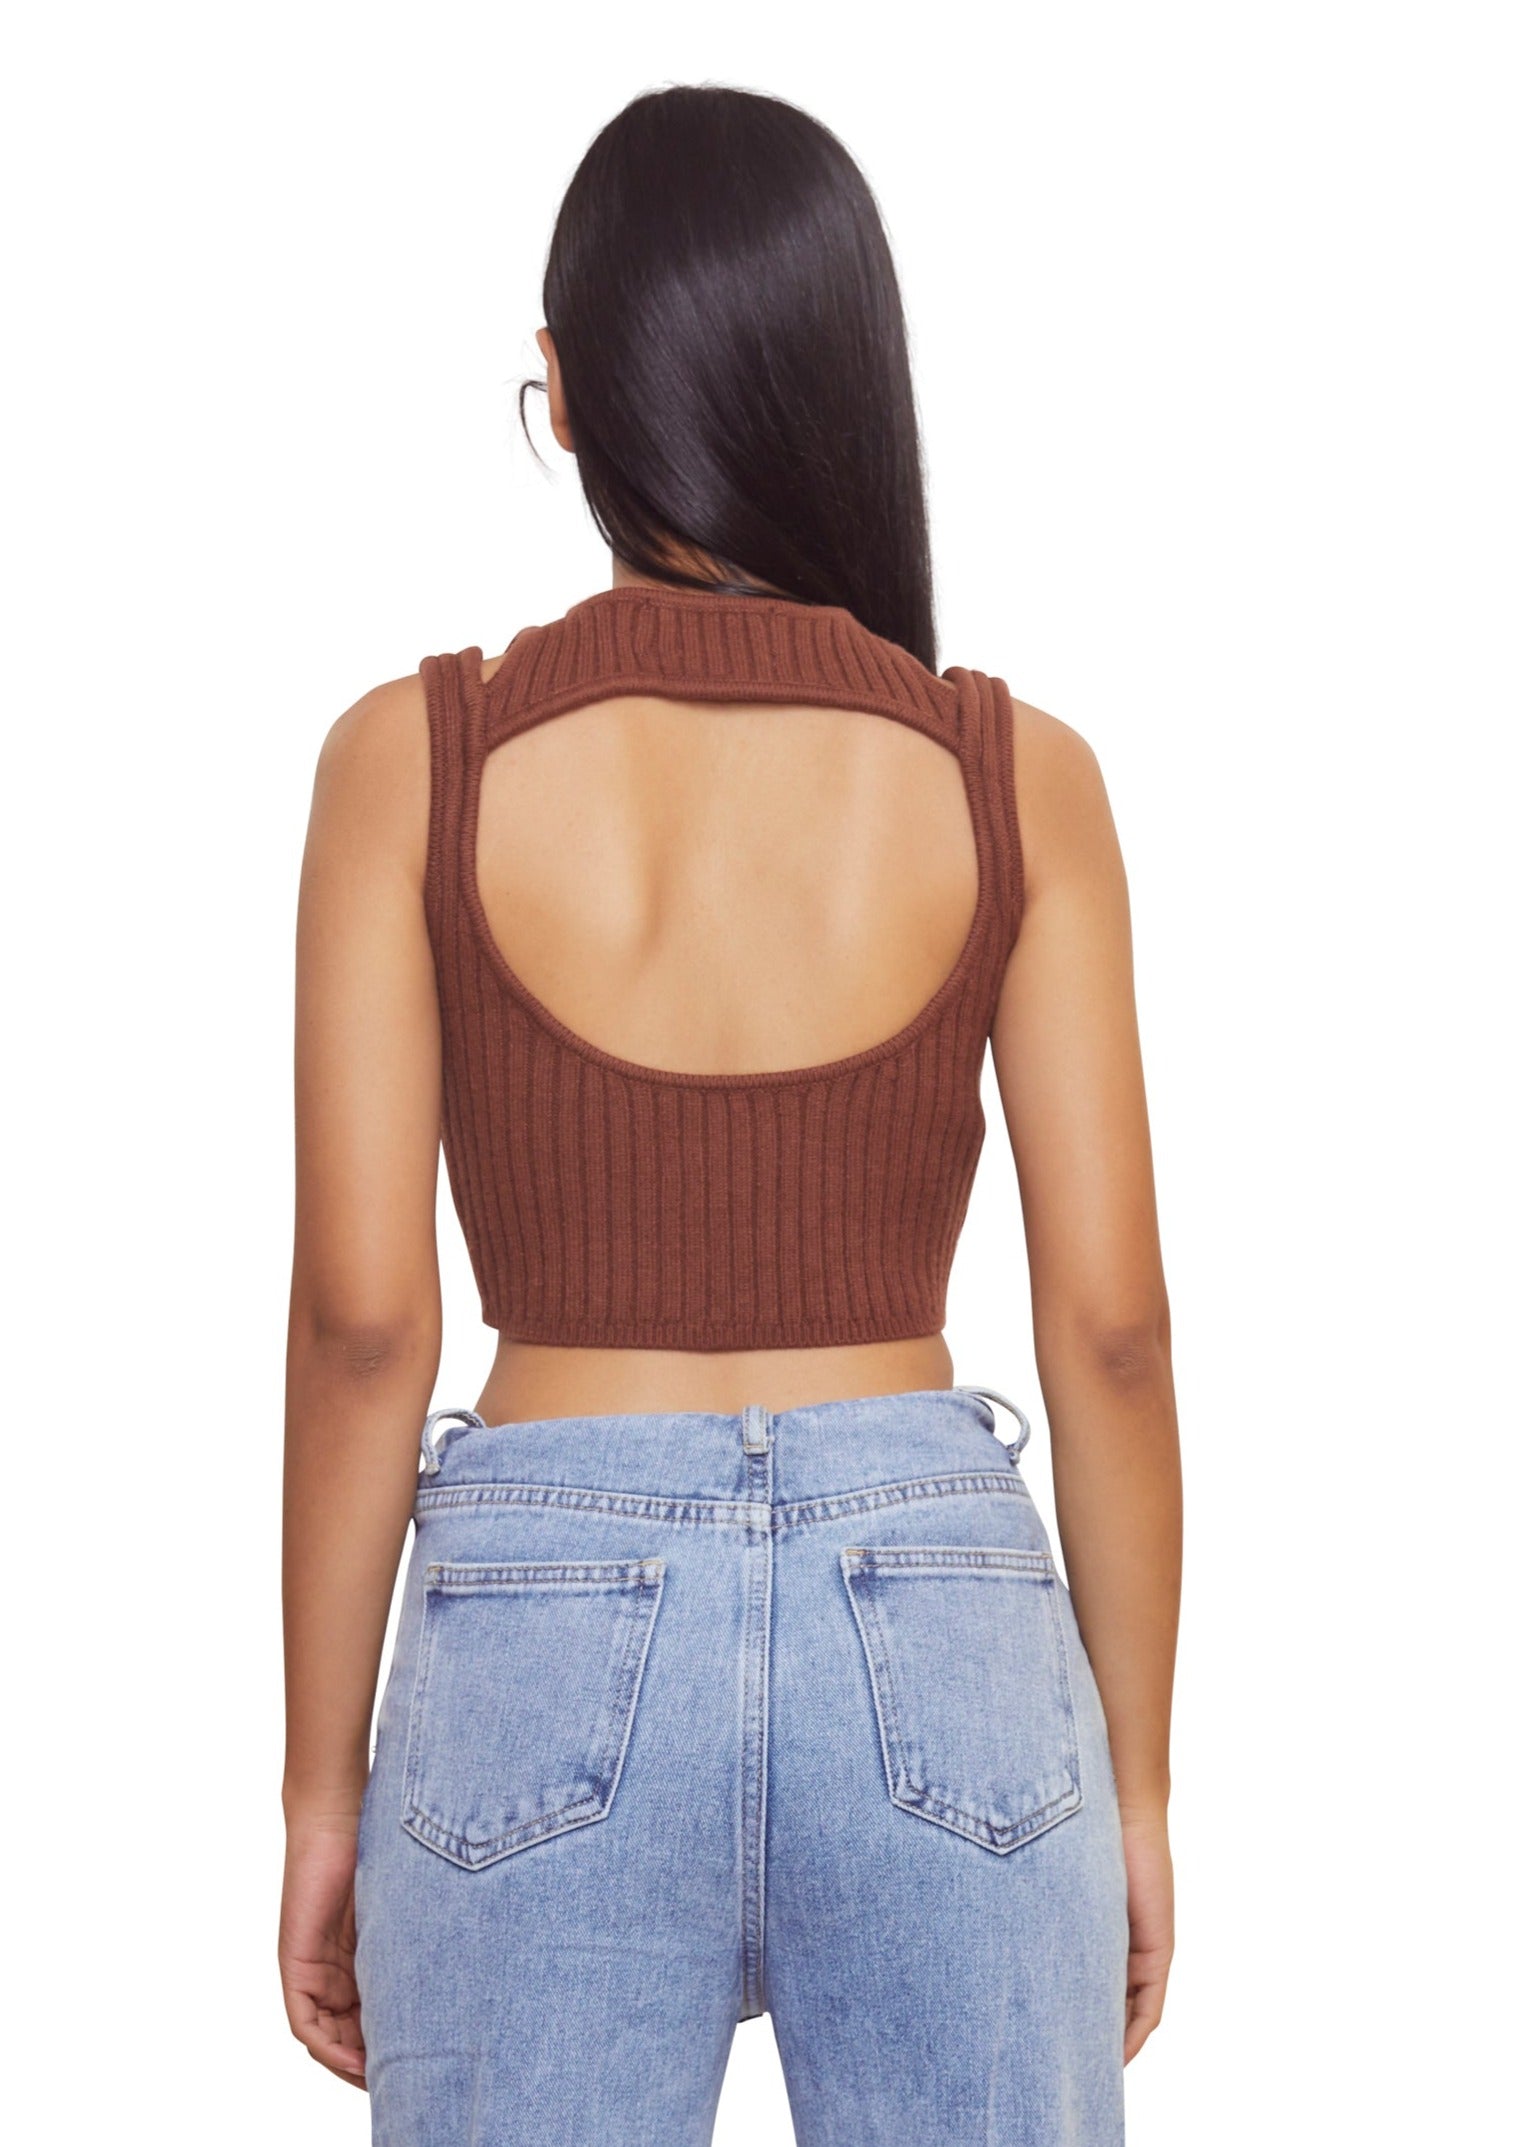 Brown Ripped crop top with double strap from the brand House of Sunny